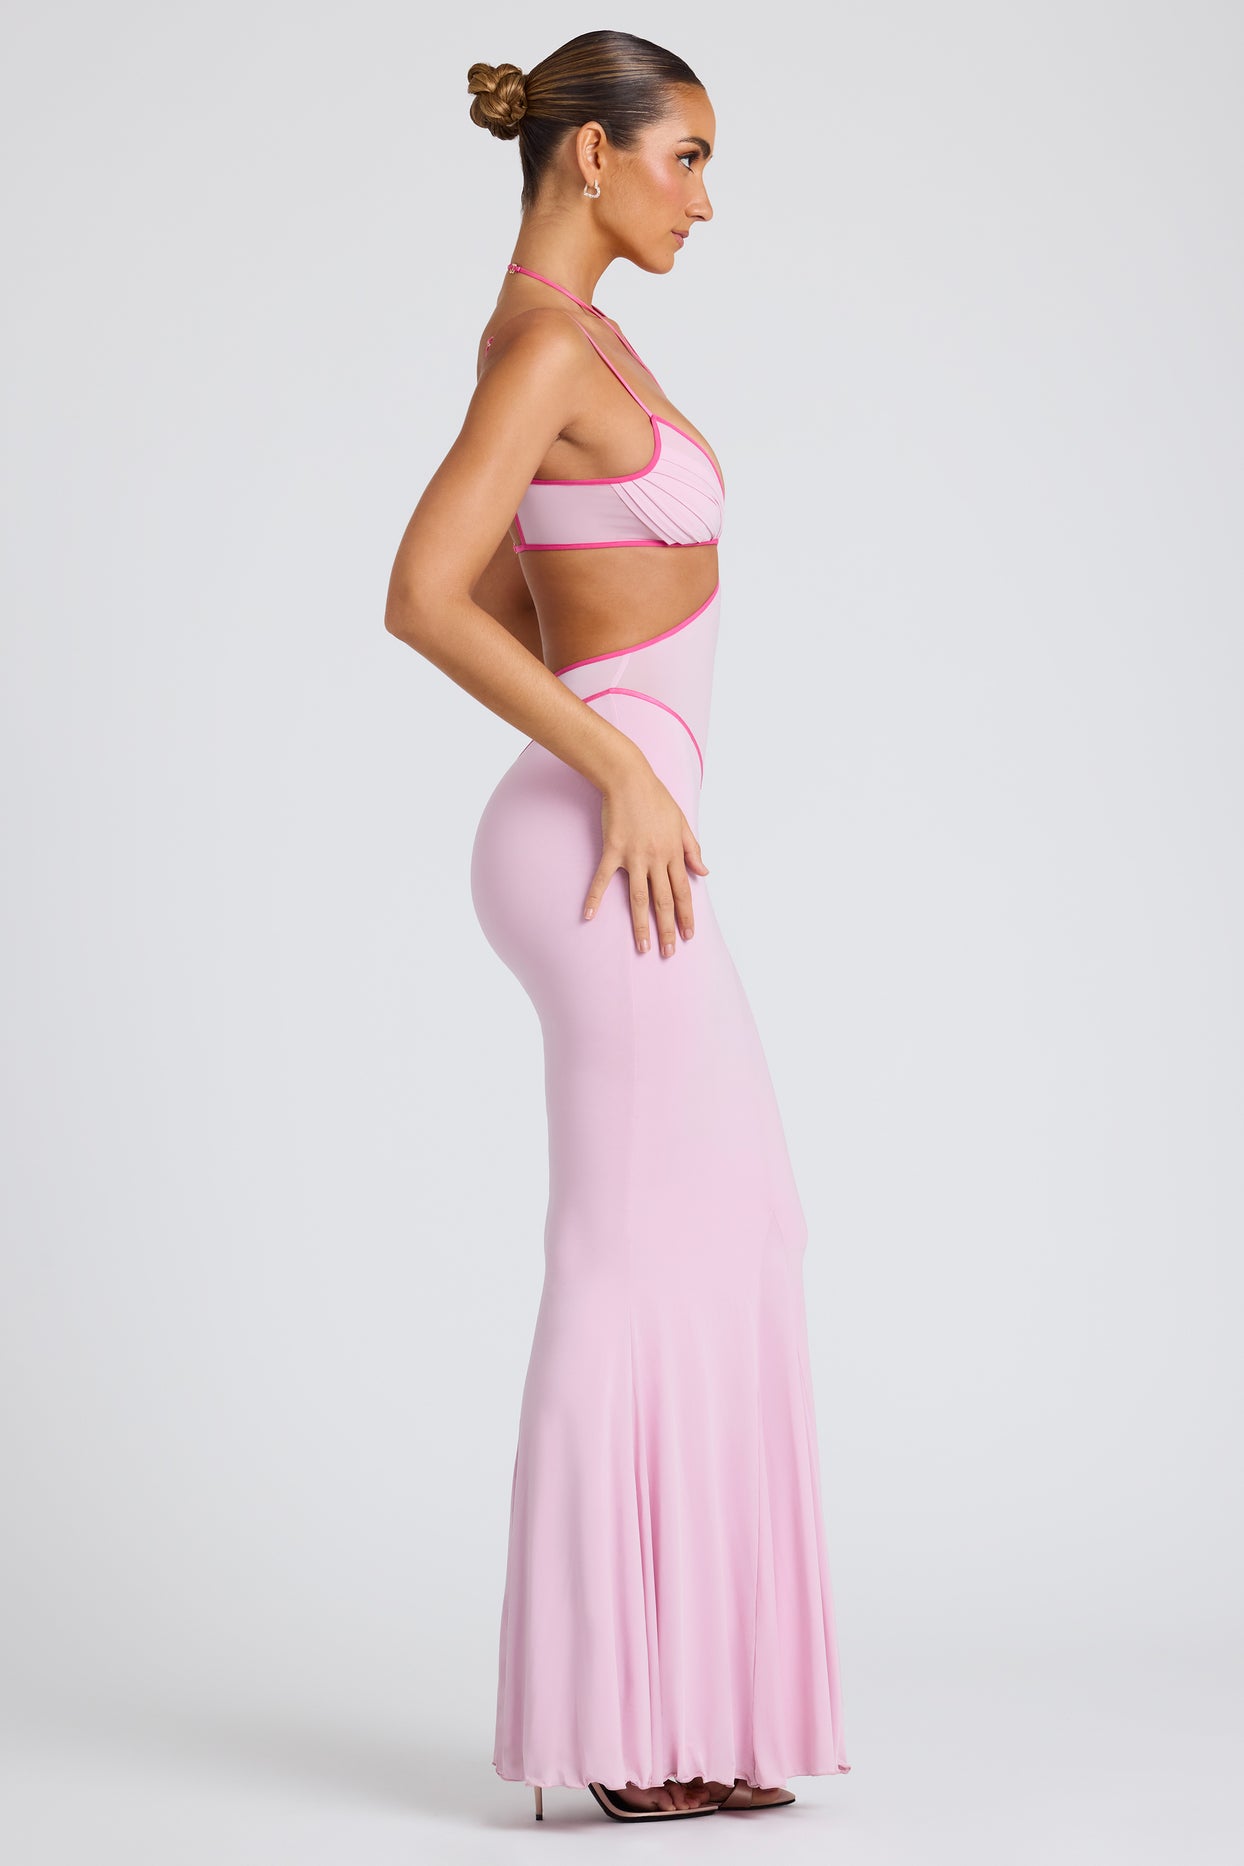 Contrast Stitch Cut Out Evening Gown in Soft Pink